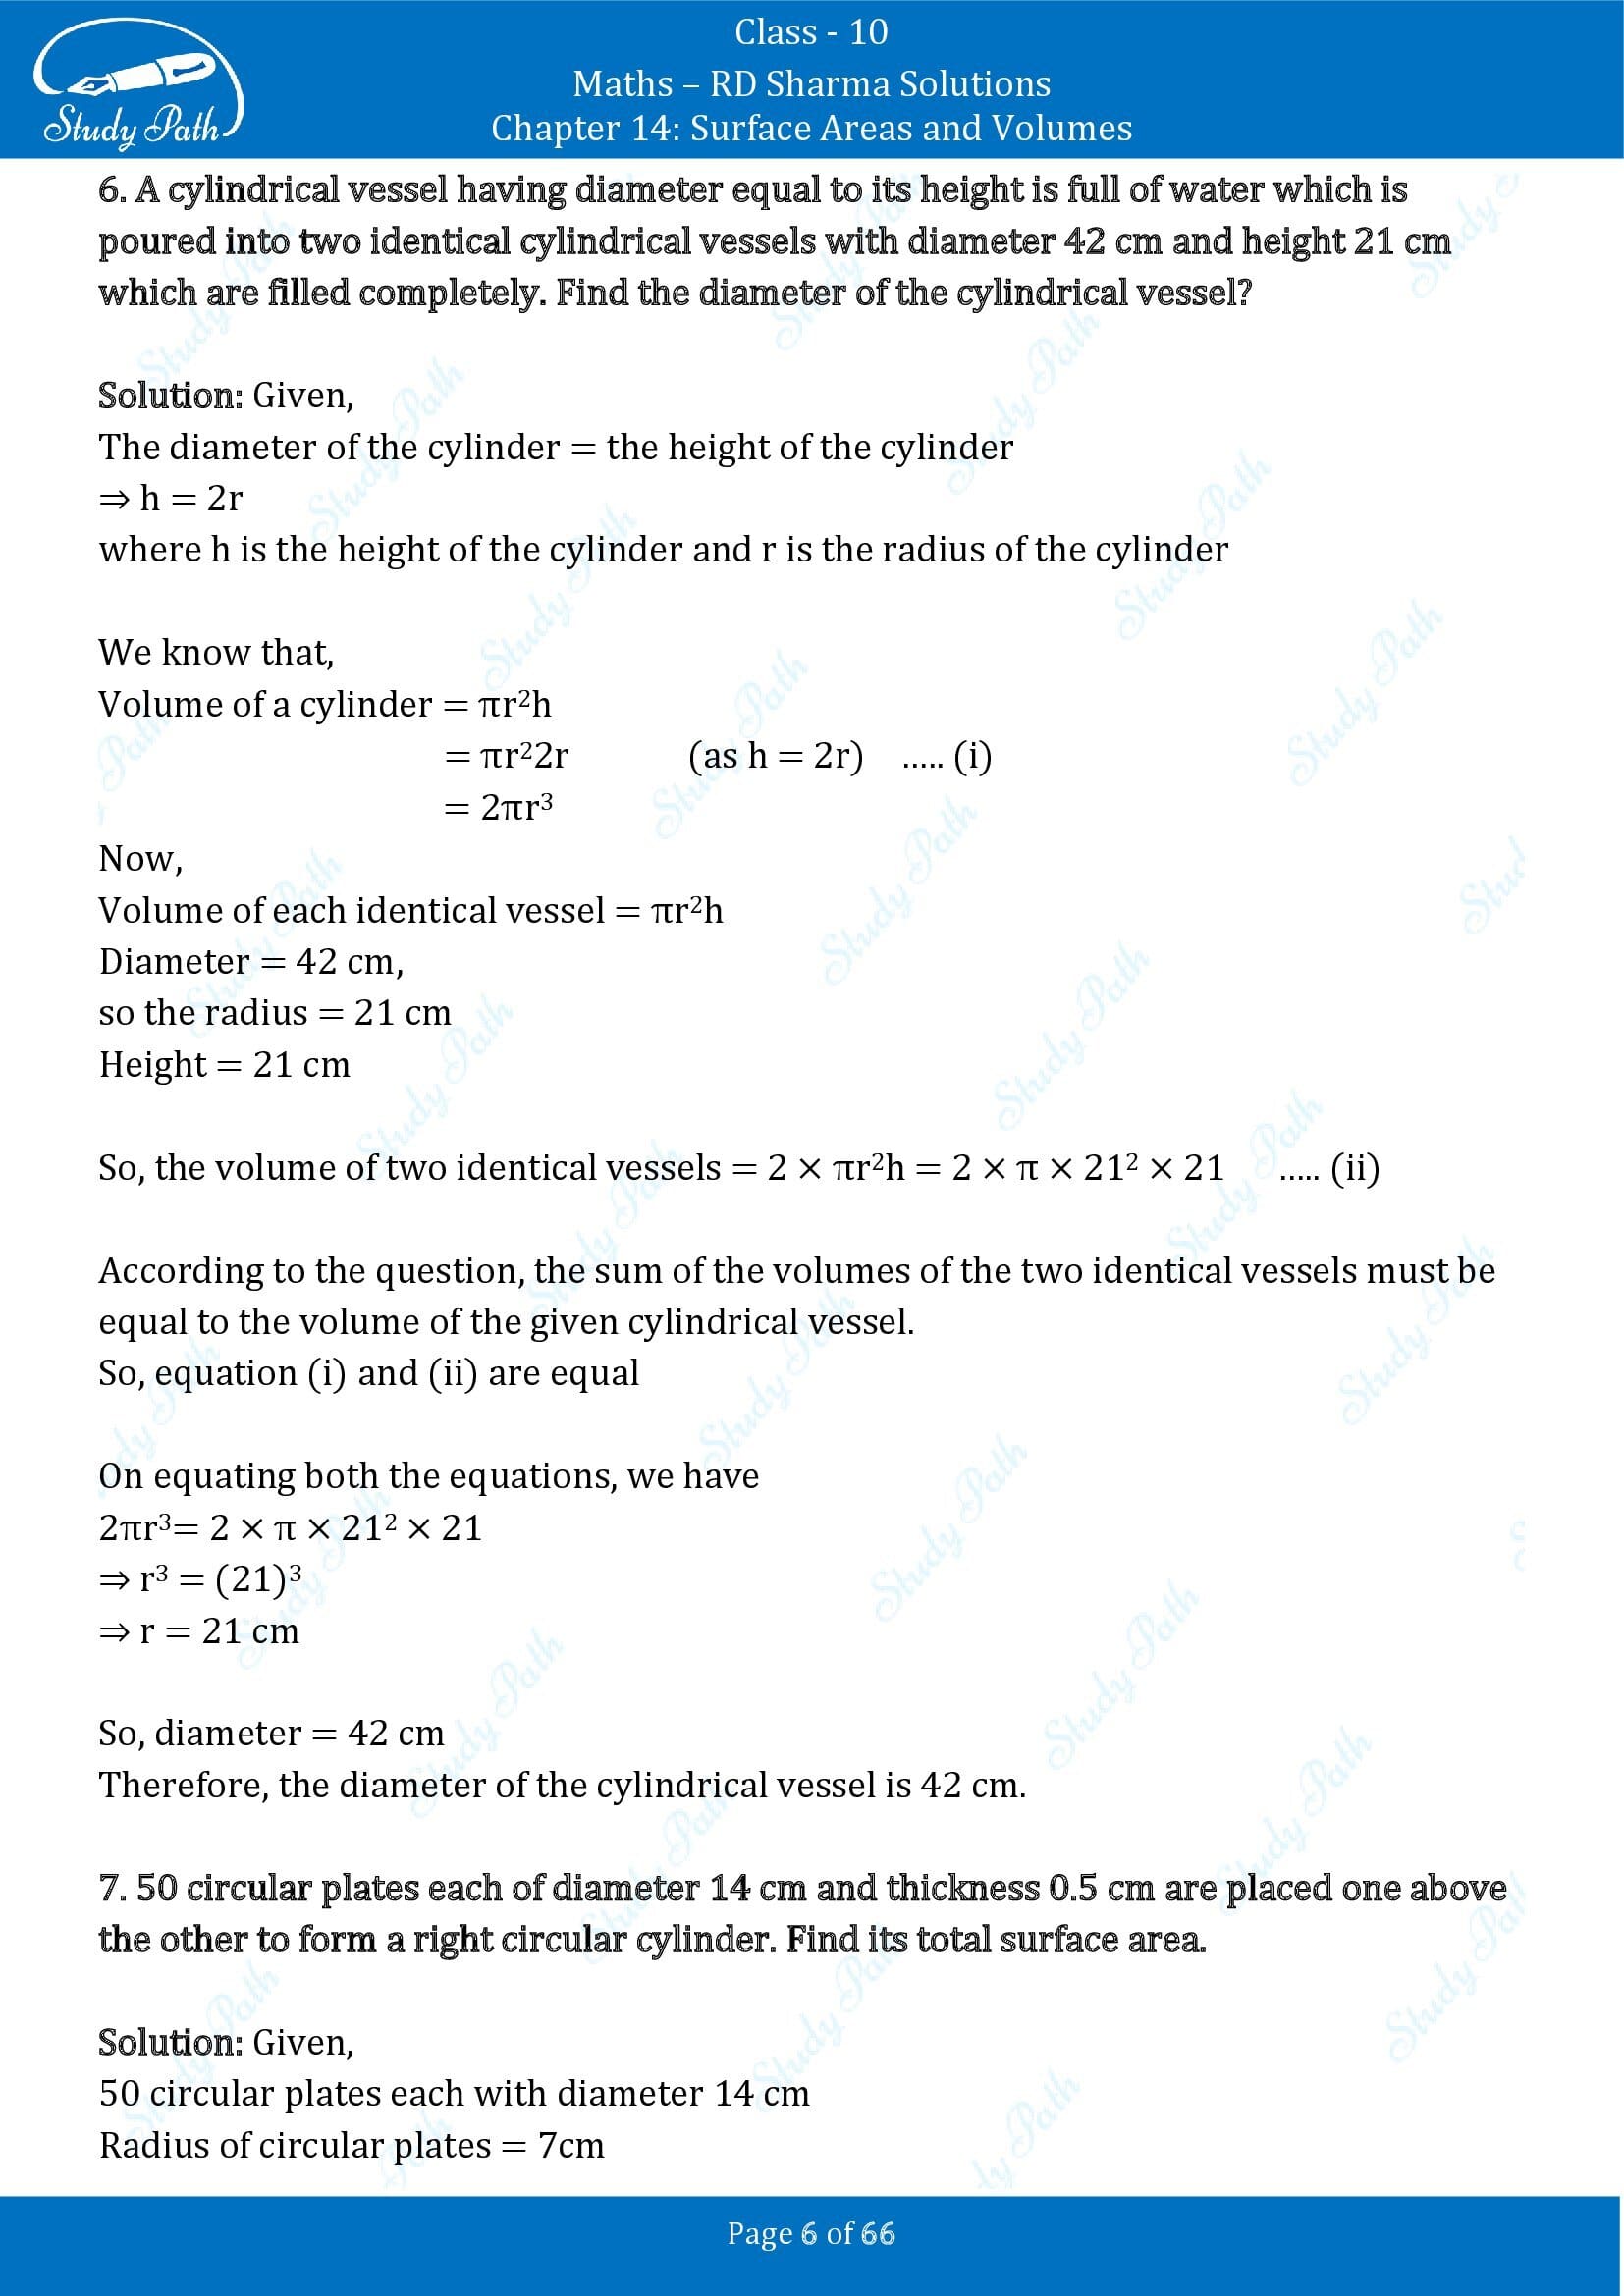 RD Sharma Solutions Class 10 Chapter 14 Surface Areas and Volumes Exercise 14.1 00006